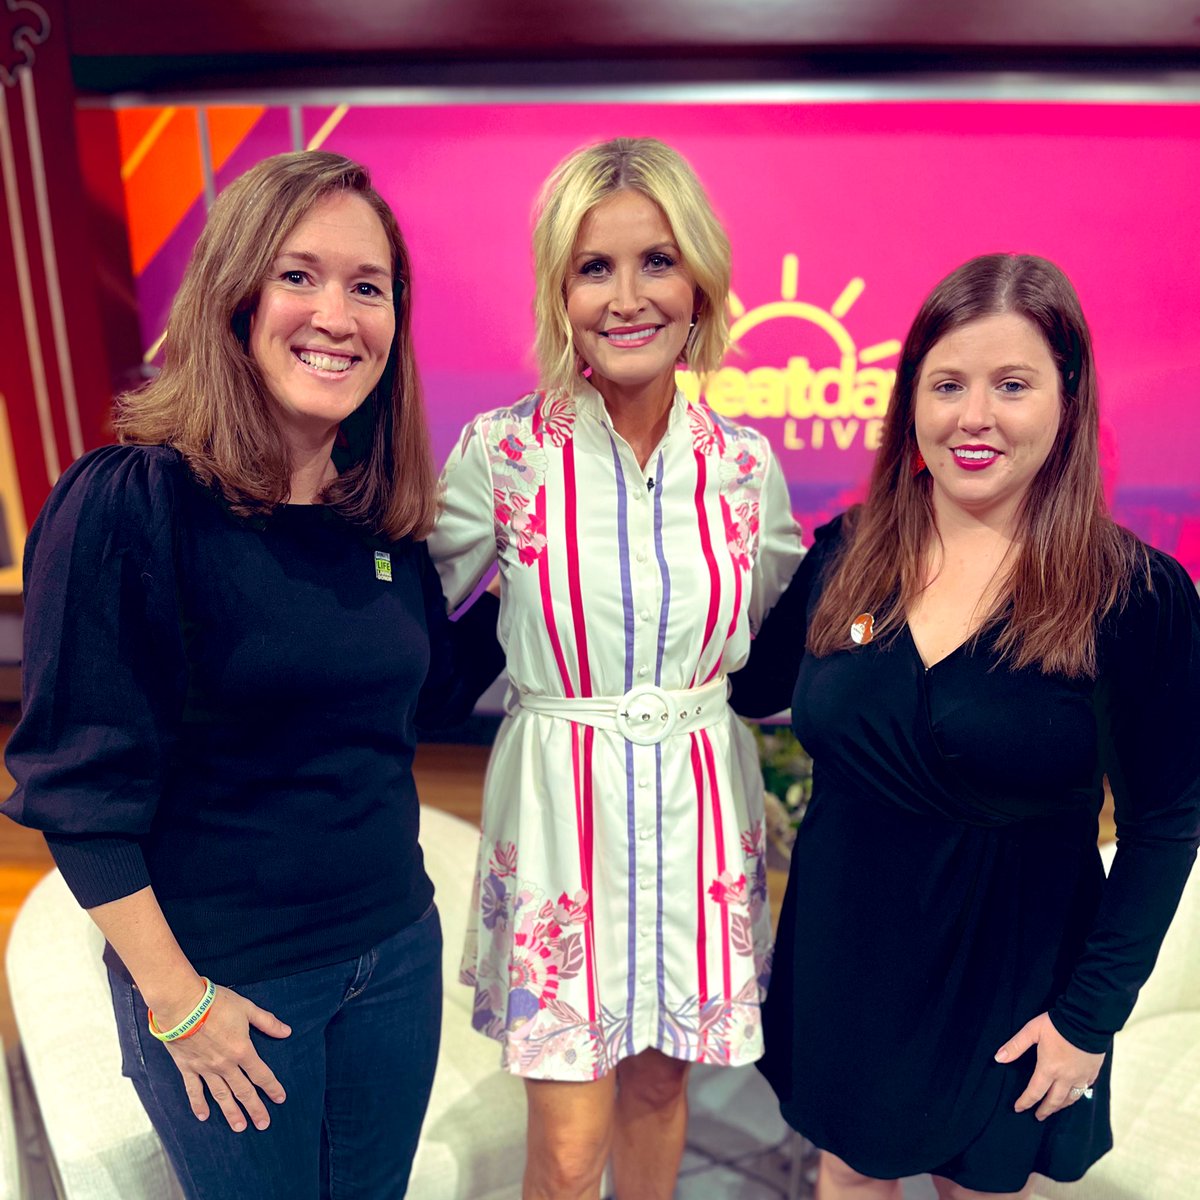 Thank you @claudiacoffeytv for hosting us this morning to talk about #KidneyMonth & KY HB 131 🧡

Take a min to check your risk for kidney disease: kidney.org/kidney-quiz/

#savelivesyall